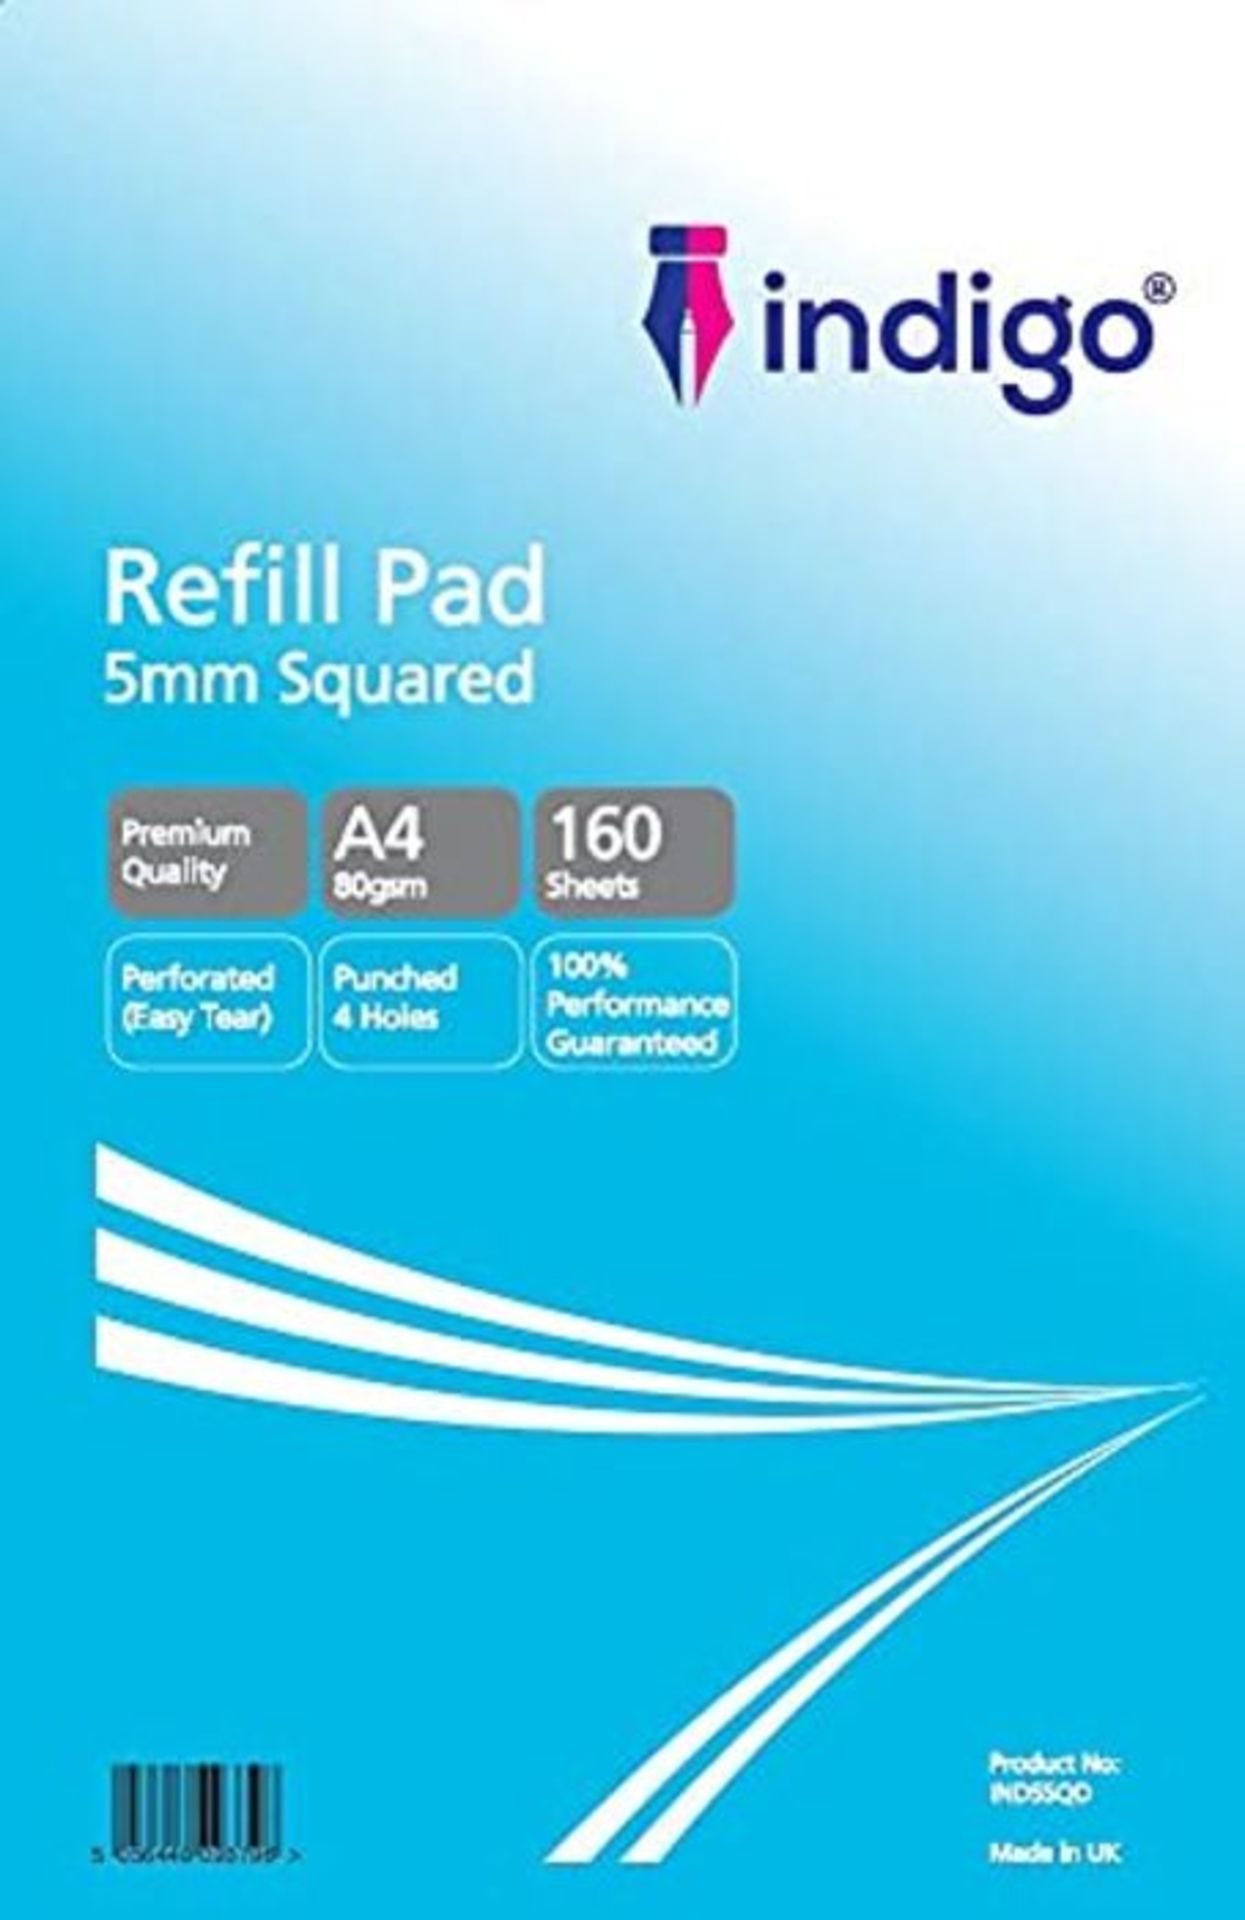 [CRACKED] indigo® A4 Refill Pad 160 Pages Headbound Perforated Punched Hole (Single,